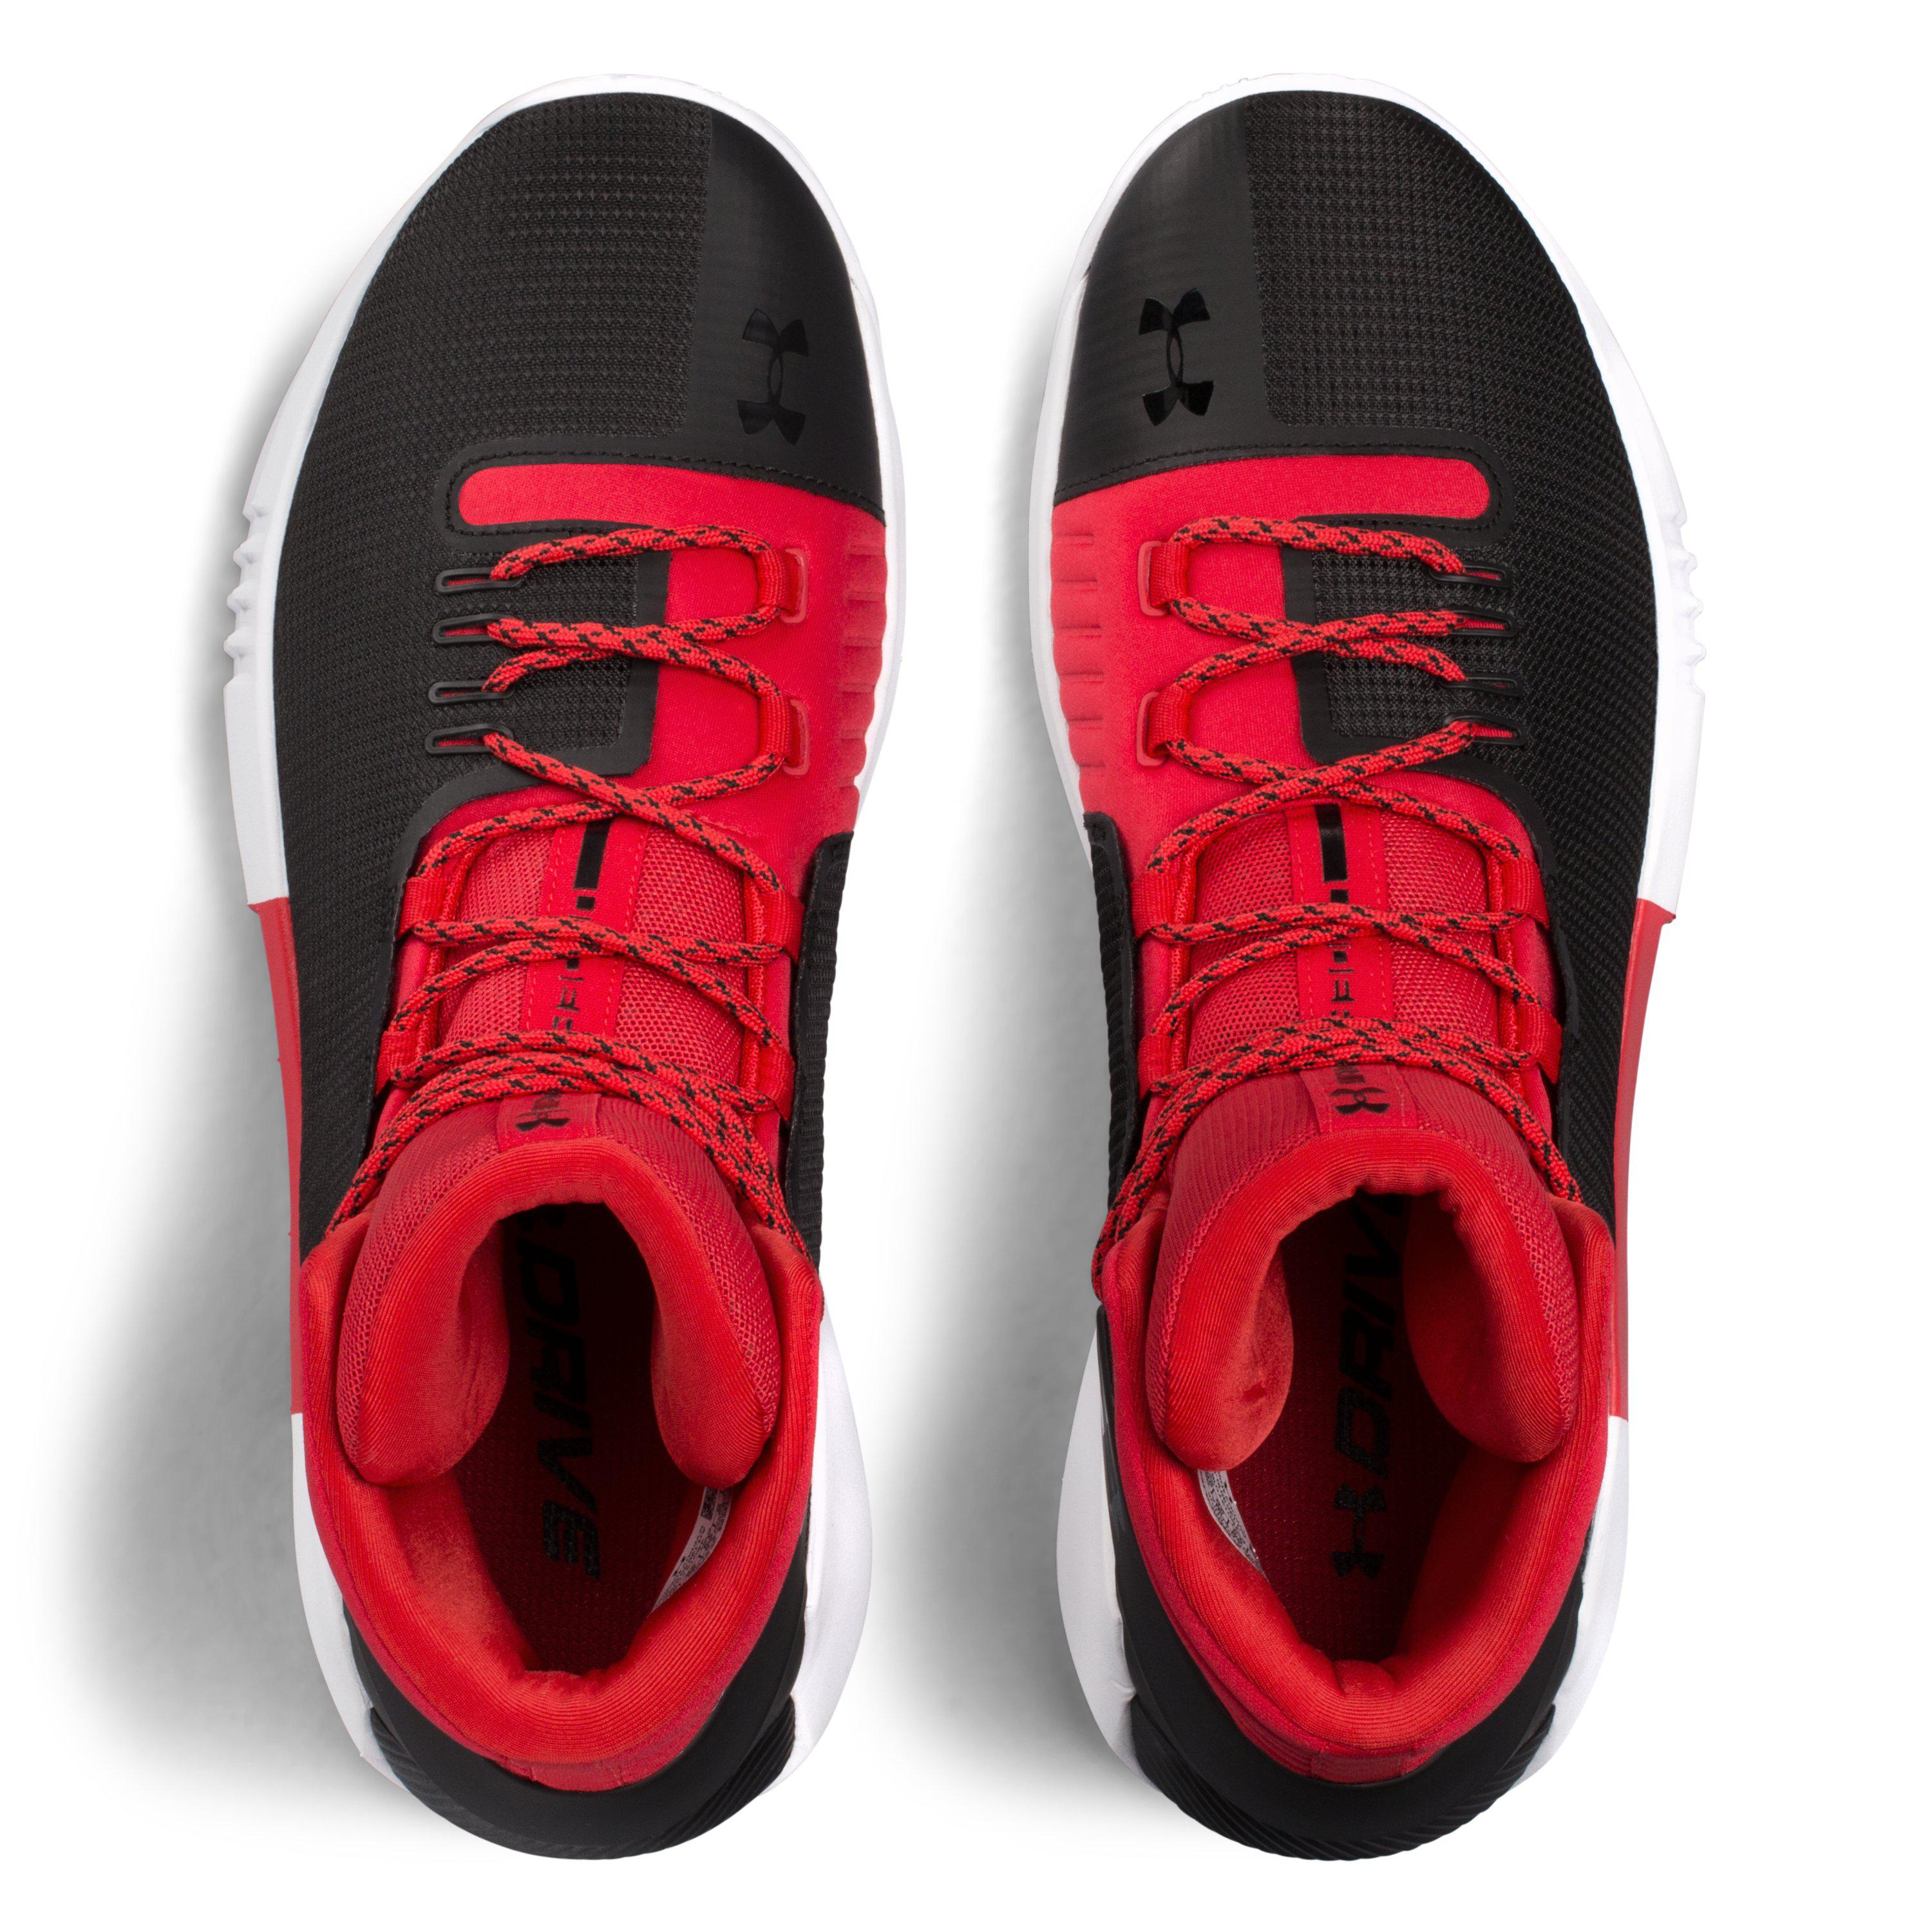 Under Armour Lace Men's Ua Team Drive 4 Basketball Shoes in Red/Black (Red)  for Men - Lyst